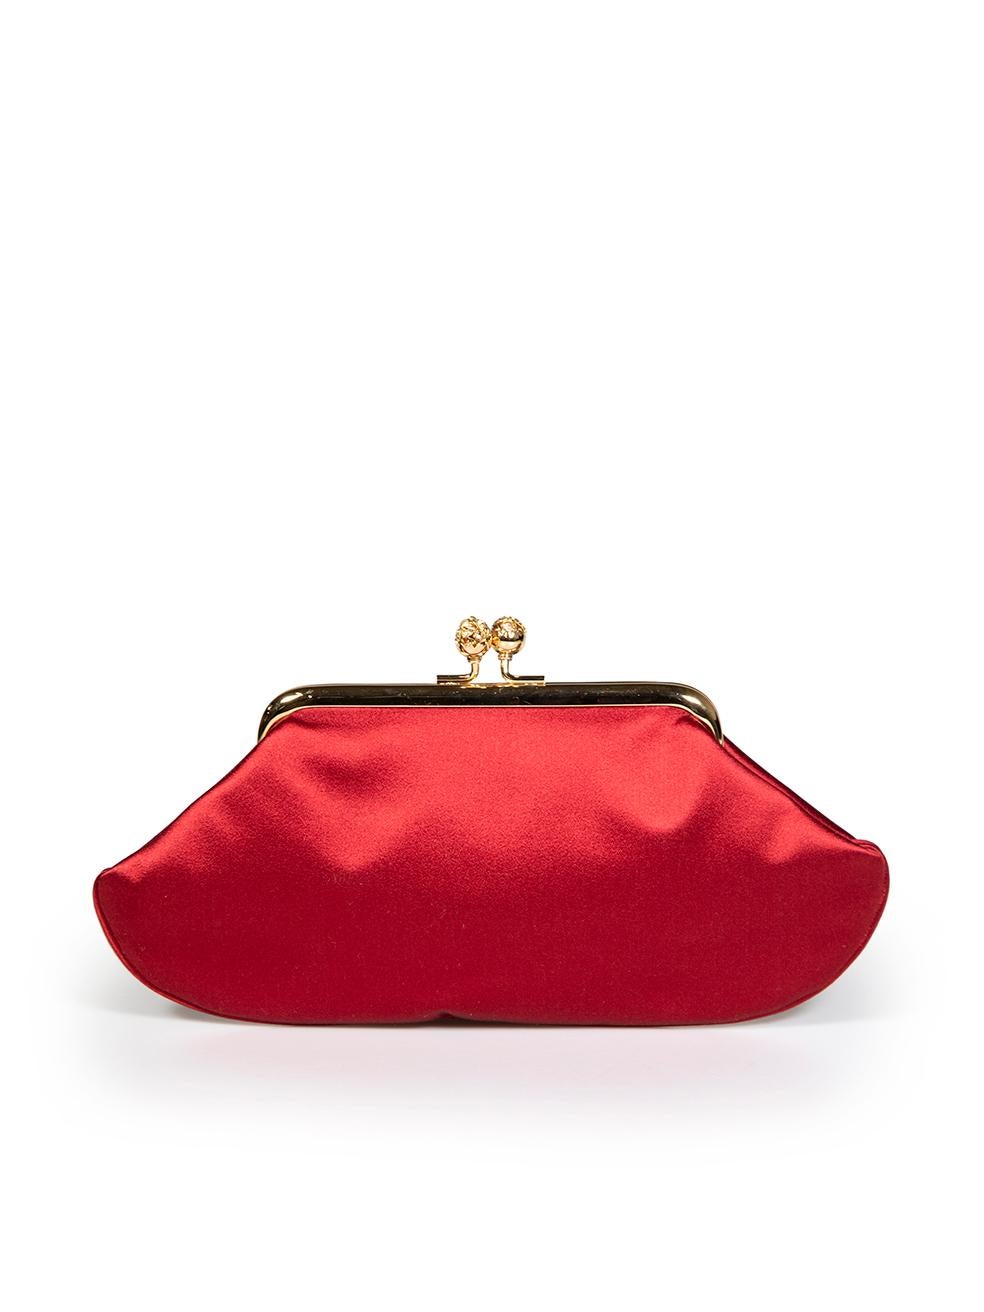 Anya Hindmarch Red Satin Gemstone Clasp Clutch In Excellent Condition For Sale In London, GB